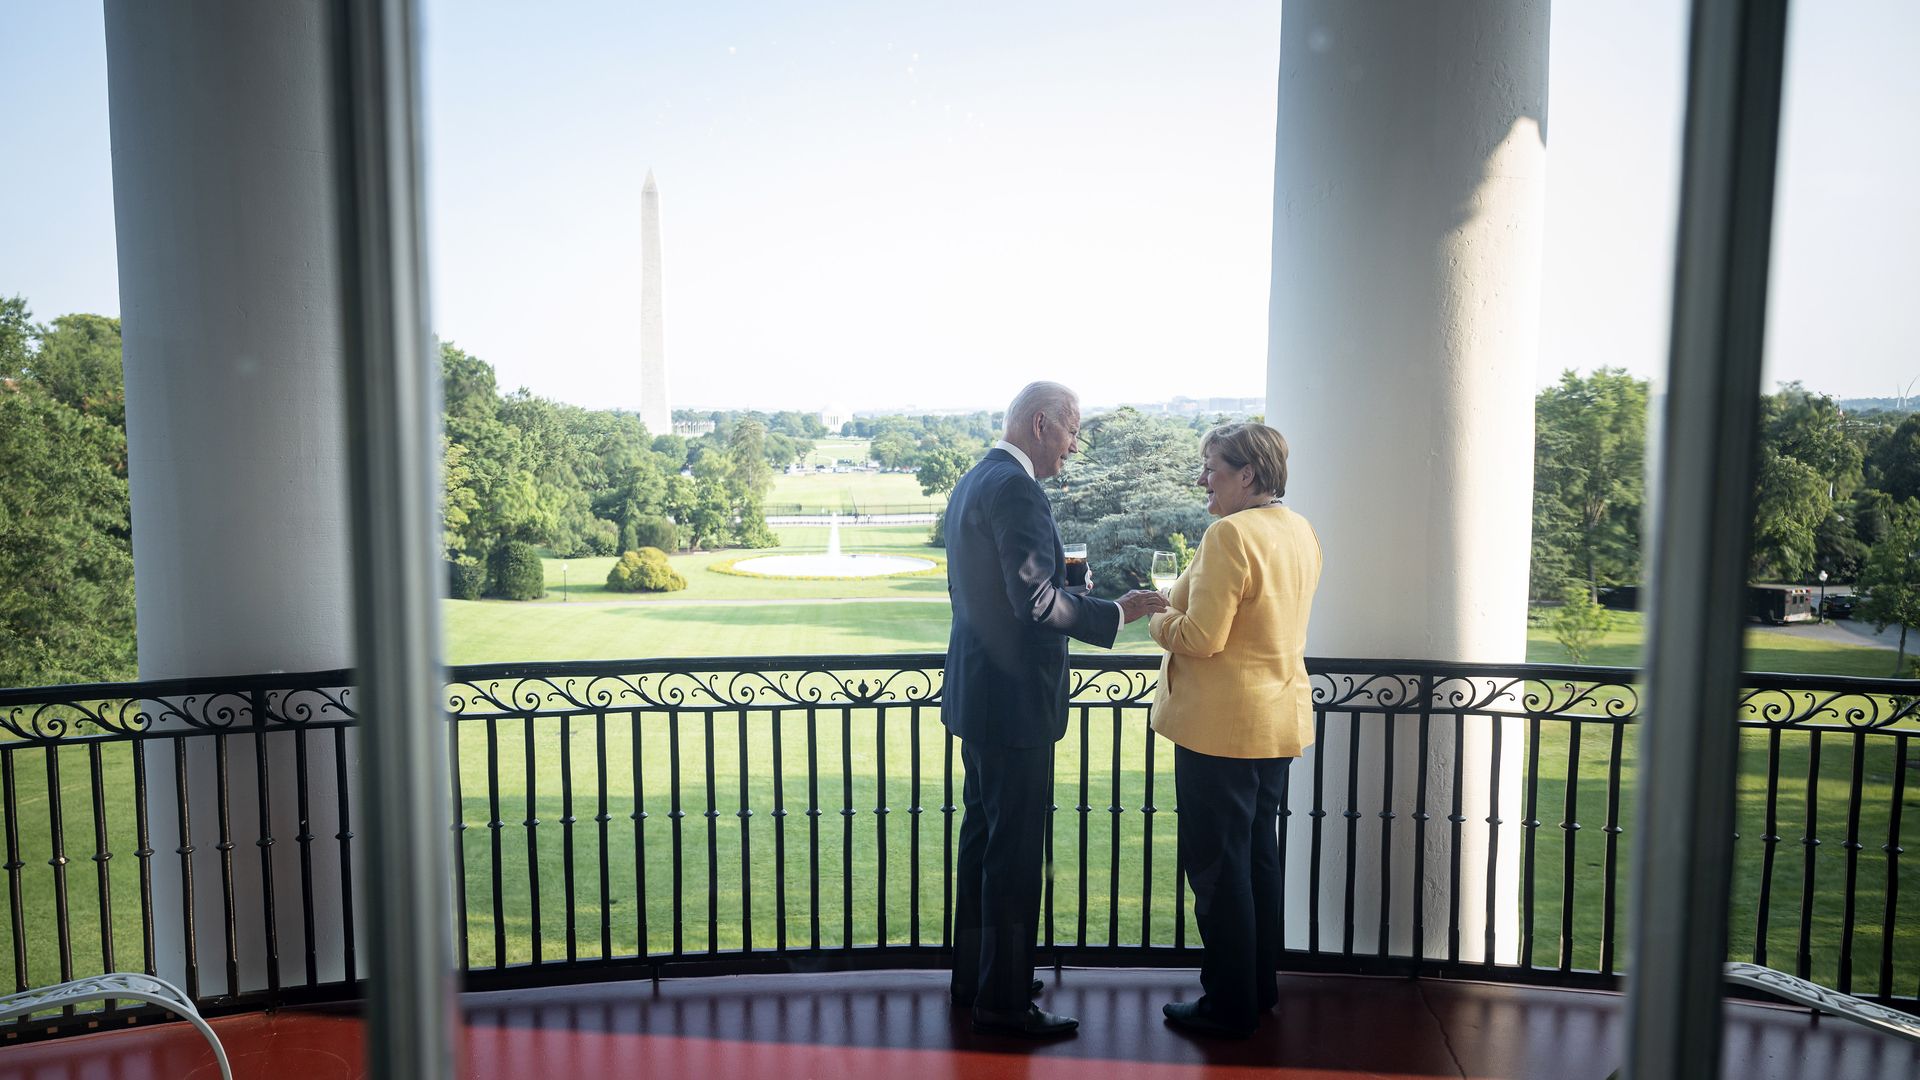 President Biden and German Chancellor Angela Merkel are seen at the White House.